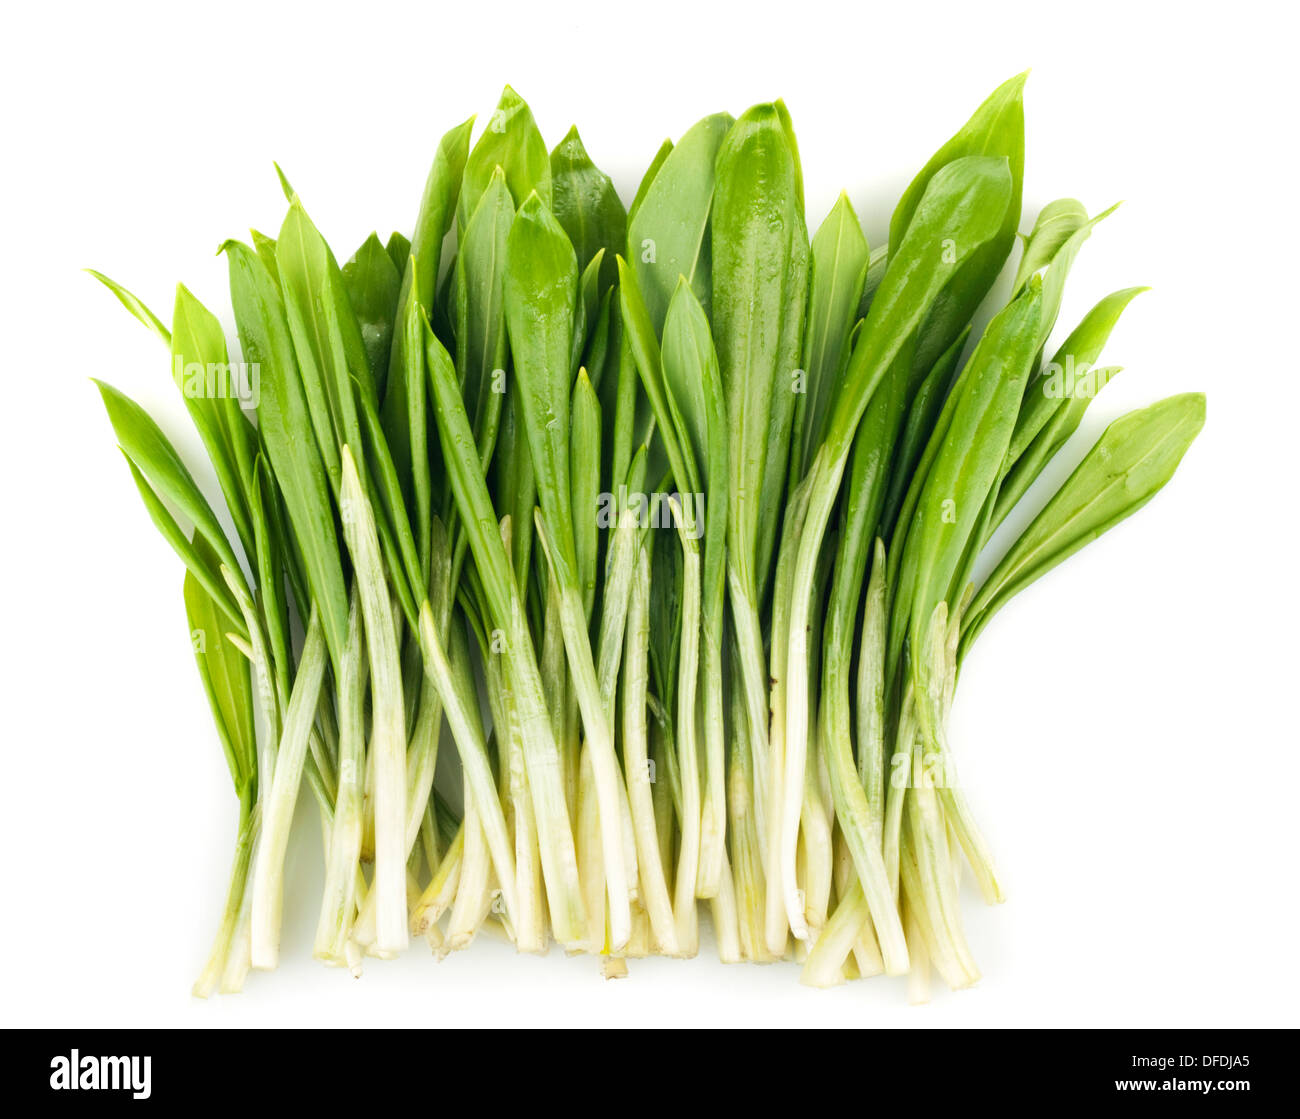 ramson bunch vegetable isolated on white background Stock Photo